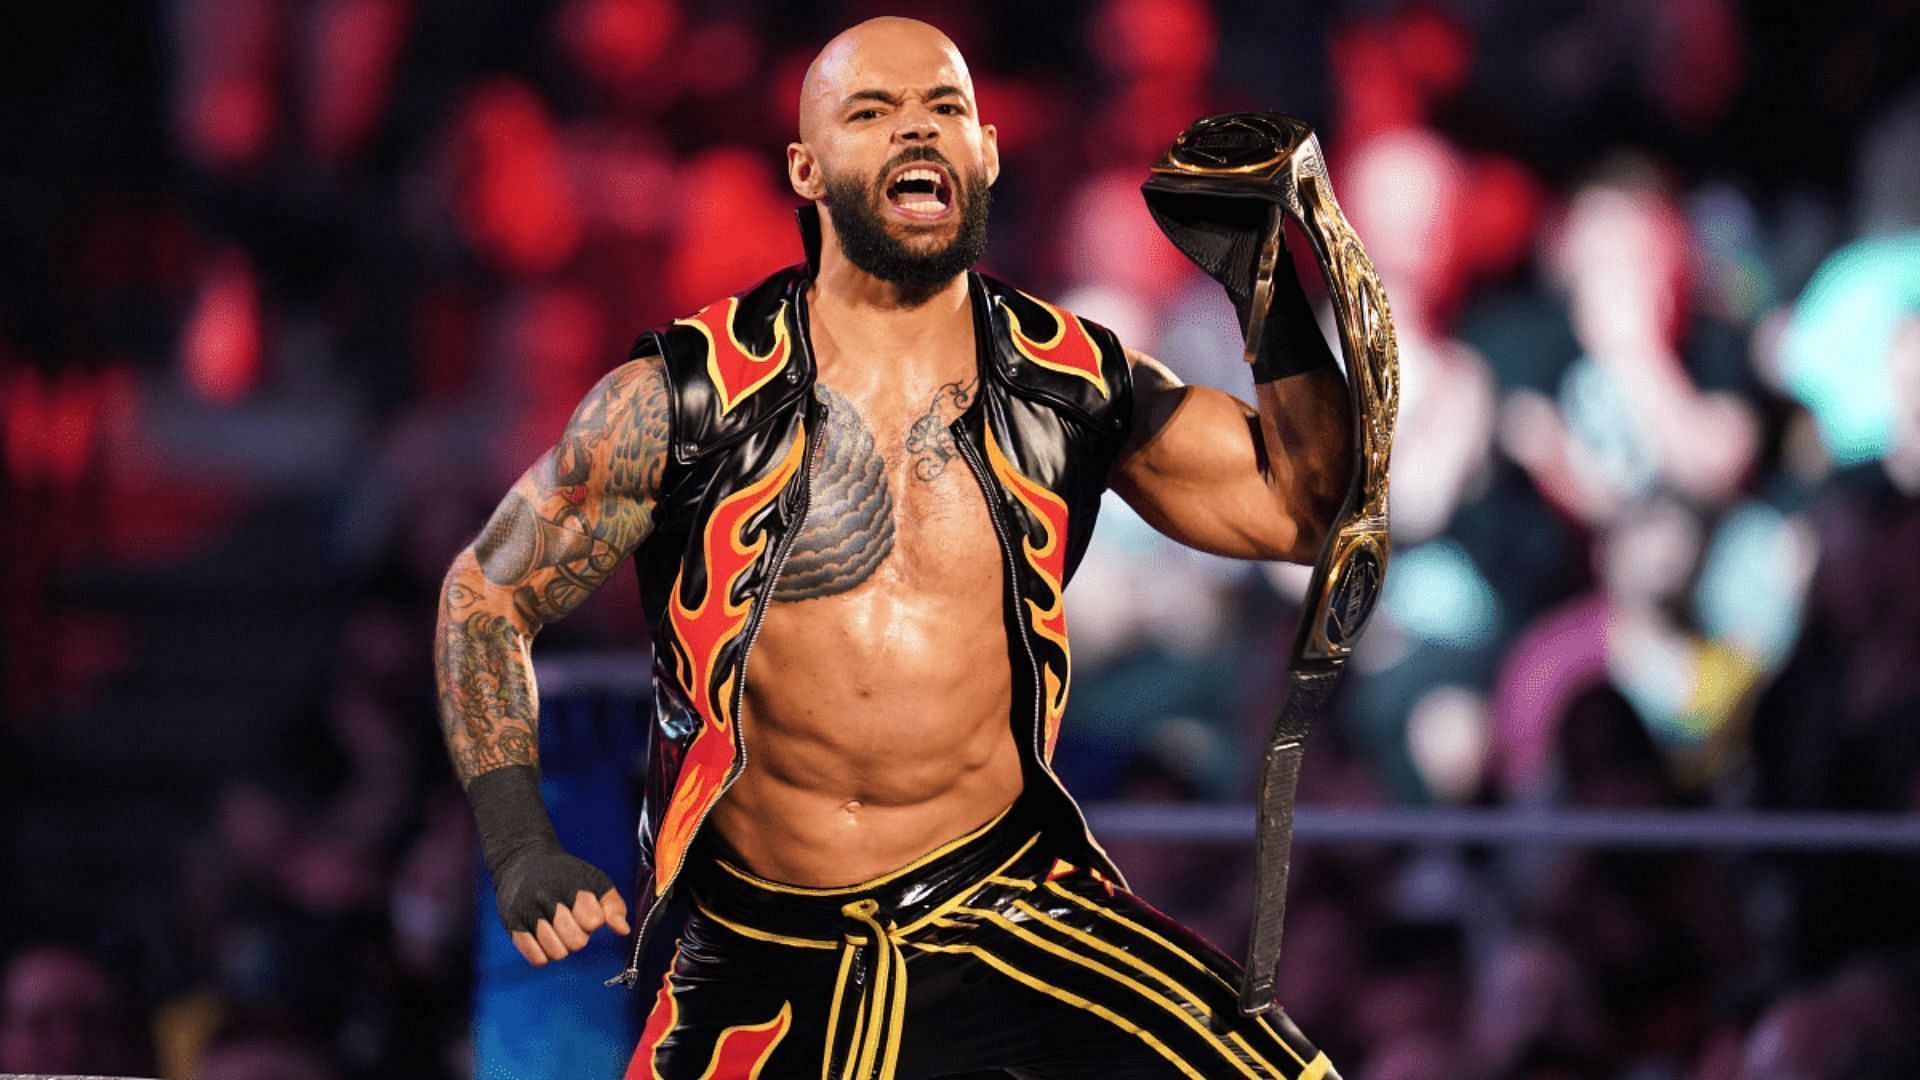 The WWE Superstar turned 34 today